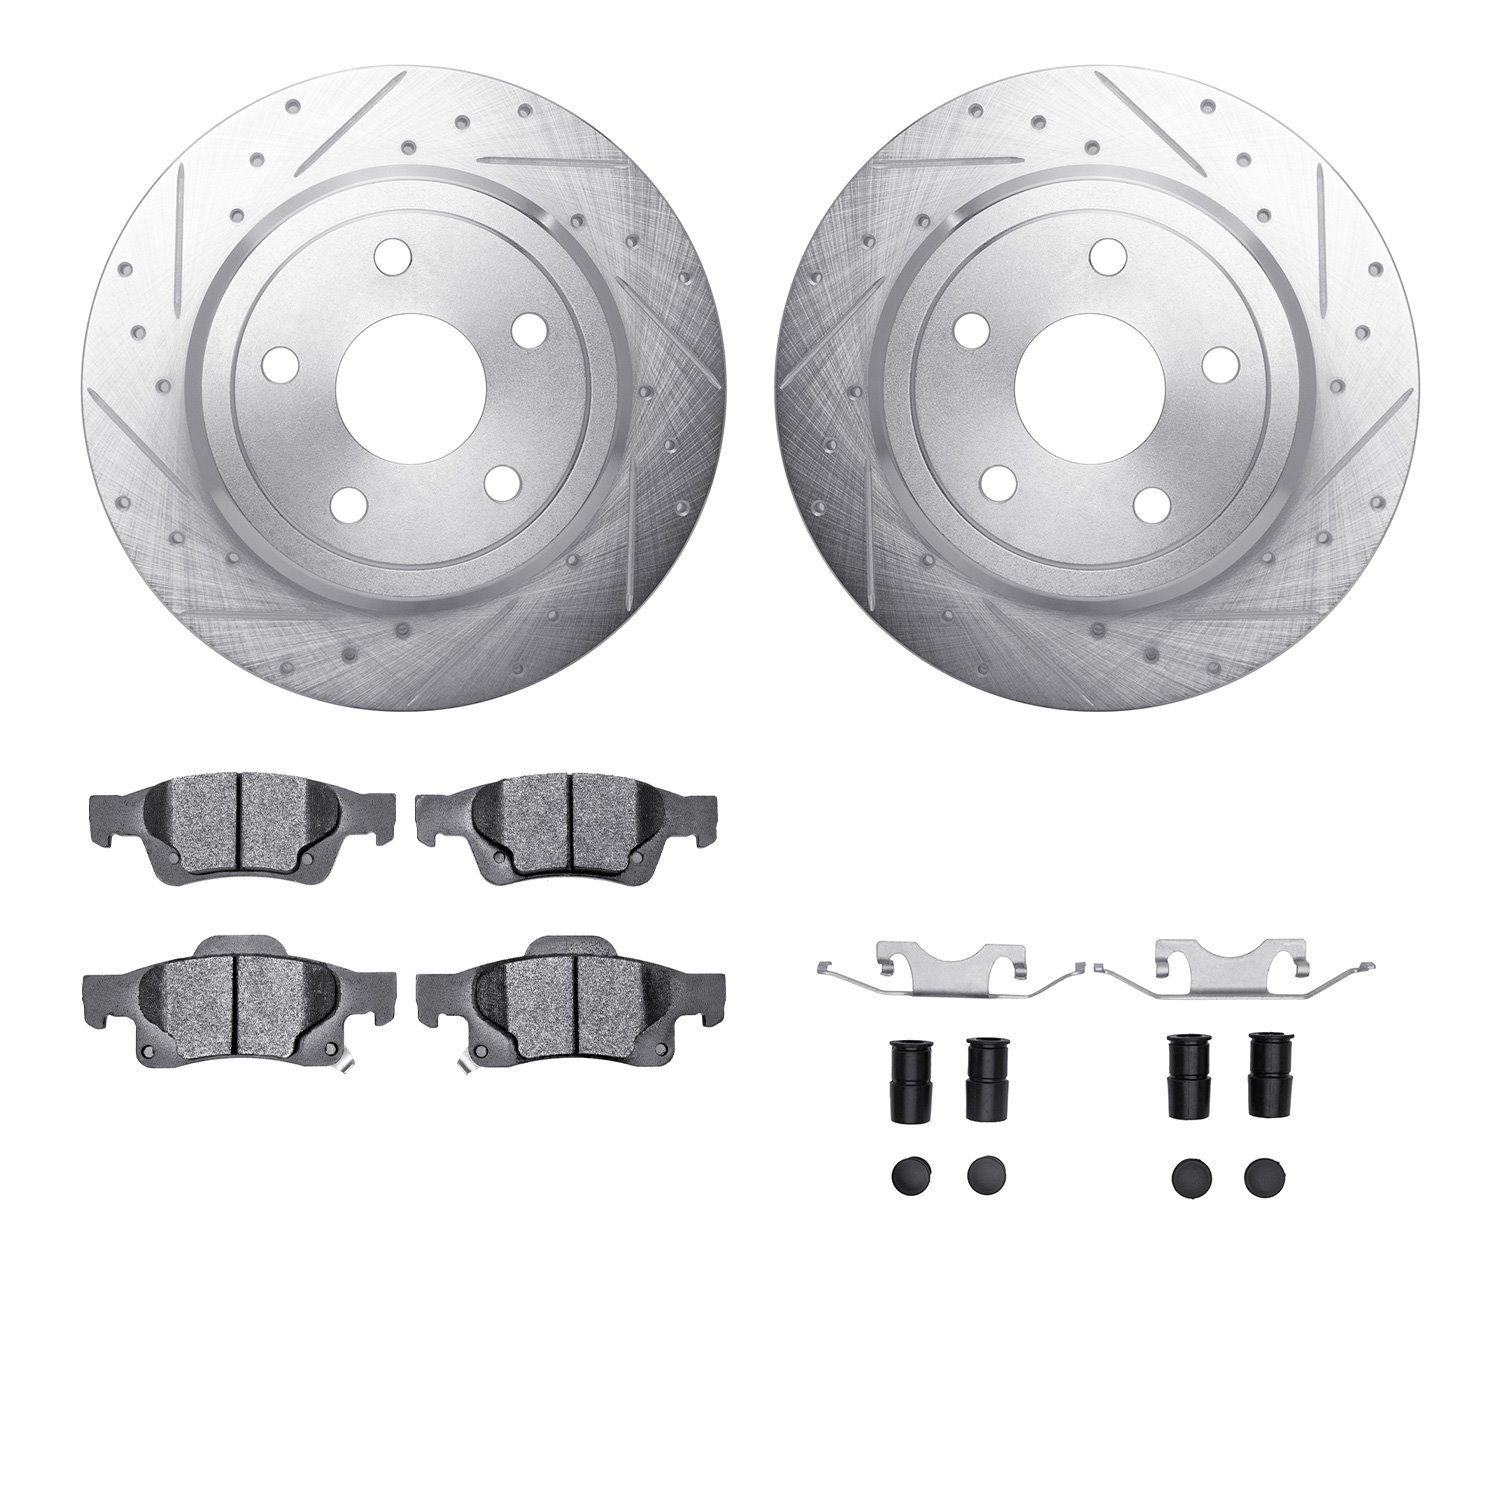 7412-42005 Drilled/Slotted Brake Rotors with Ultimate-Duty Brake Pads Kit & Hardware [Silver], Fits Select Mopar, Position: Rear